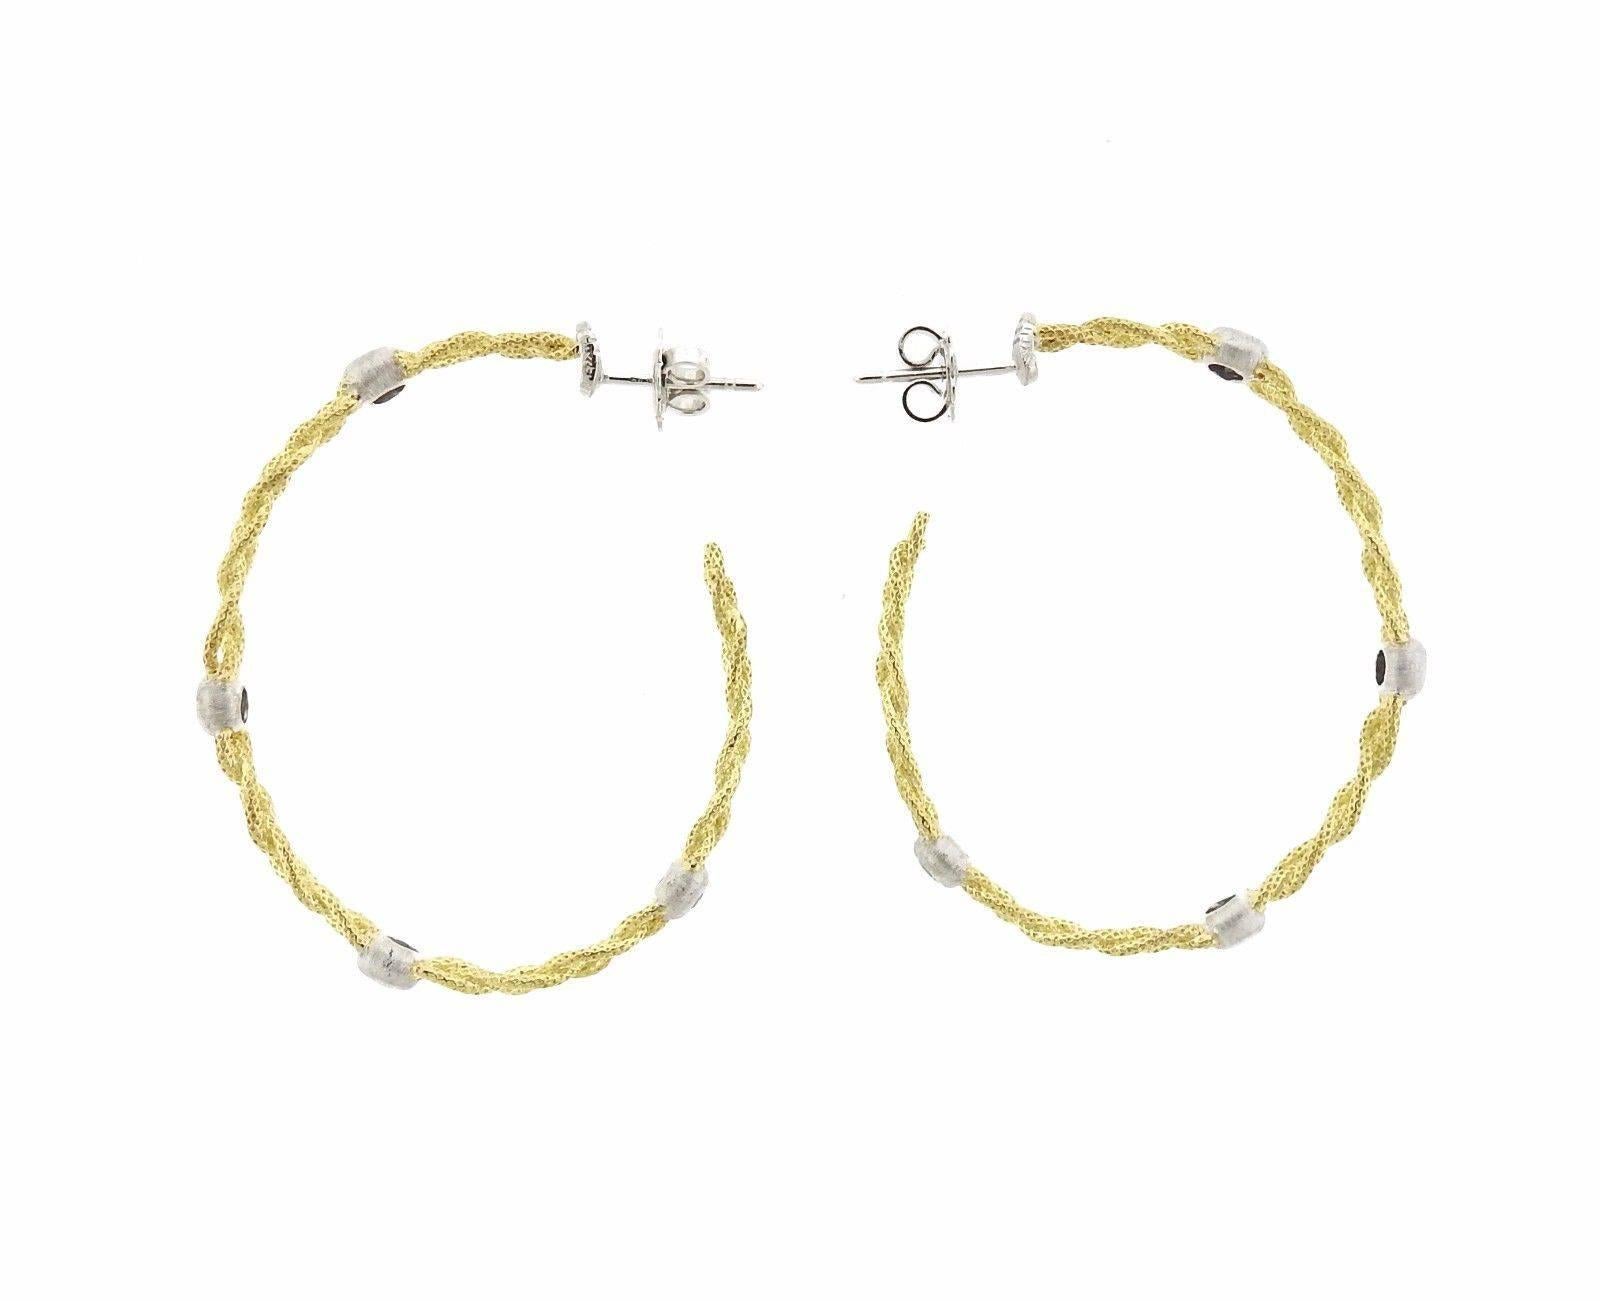 A pair of 18k yellow and white gold hoop earrings set with approximately 0.85ctw of H/VS diamonds.  The earrings measure 40mm in diameter and are 3mm wide.  The weight of the pair is 11.7 grams.  Marked: 18k,  Italy, Buccellati.